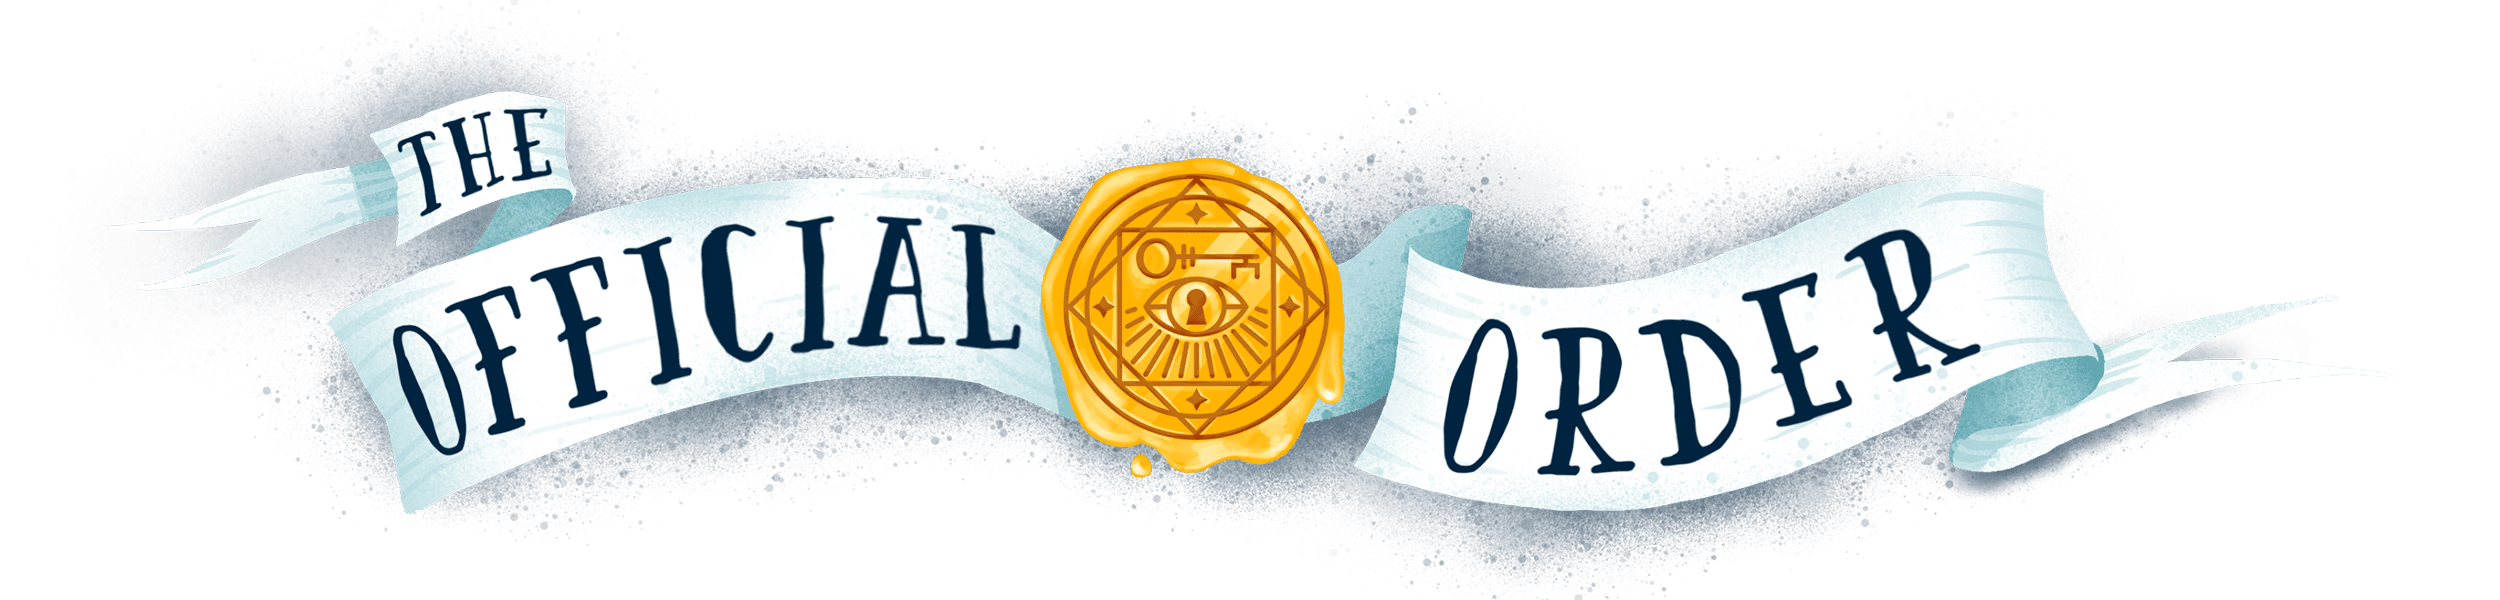 Puzzle Society gold stamp with banner saying "The Official Order" on it.